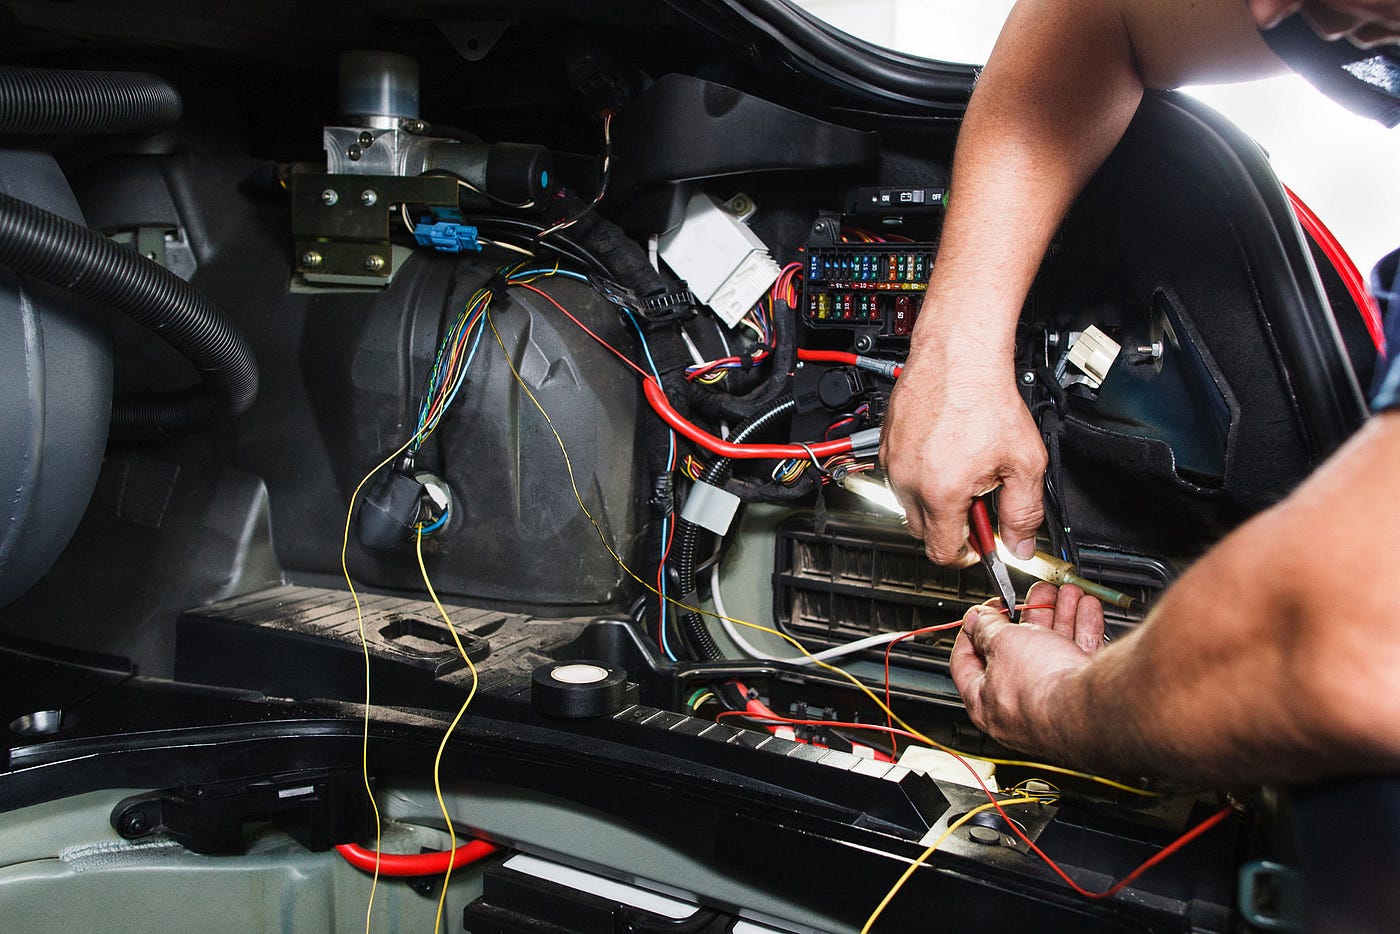 Who Does Electrical Work On Cars